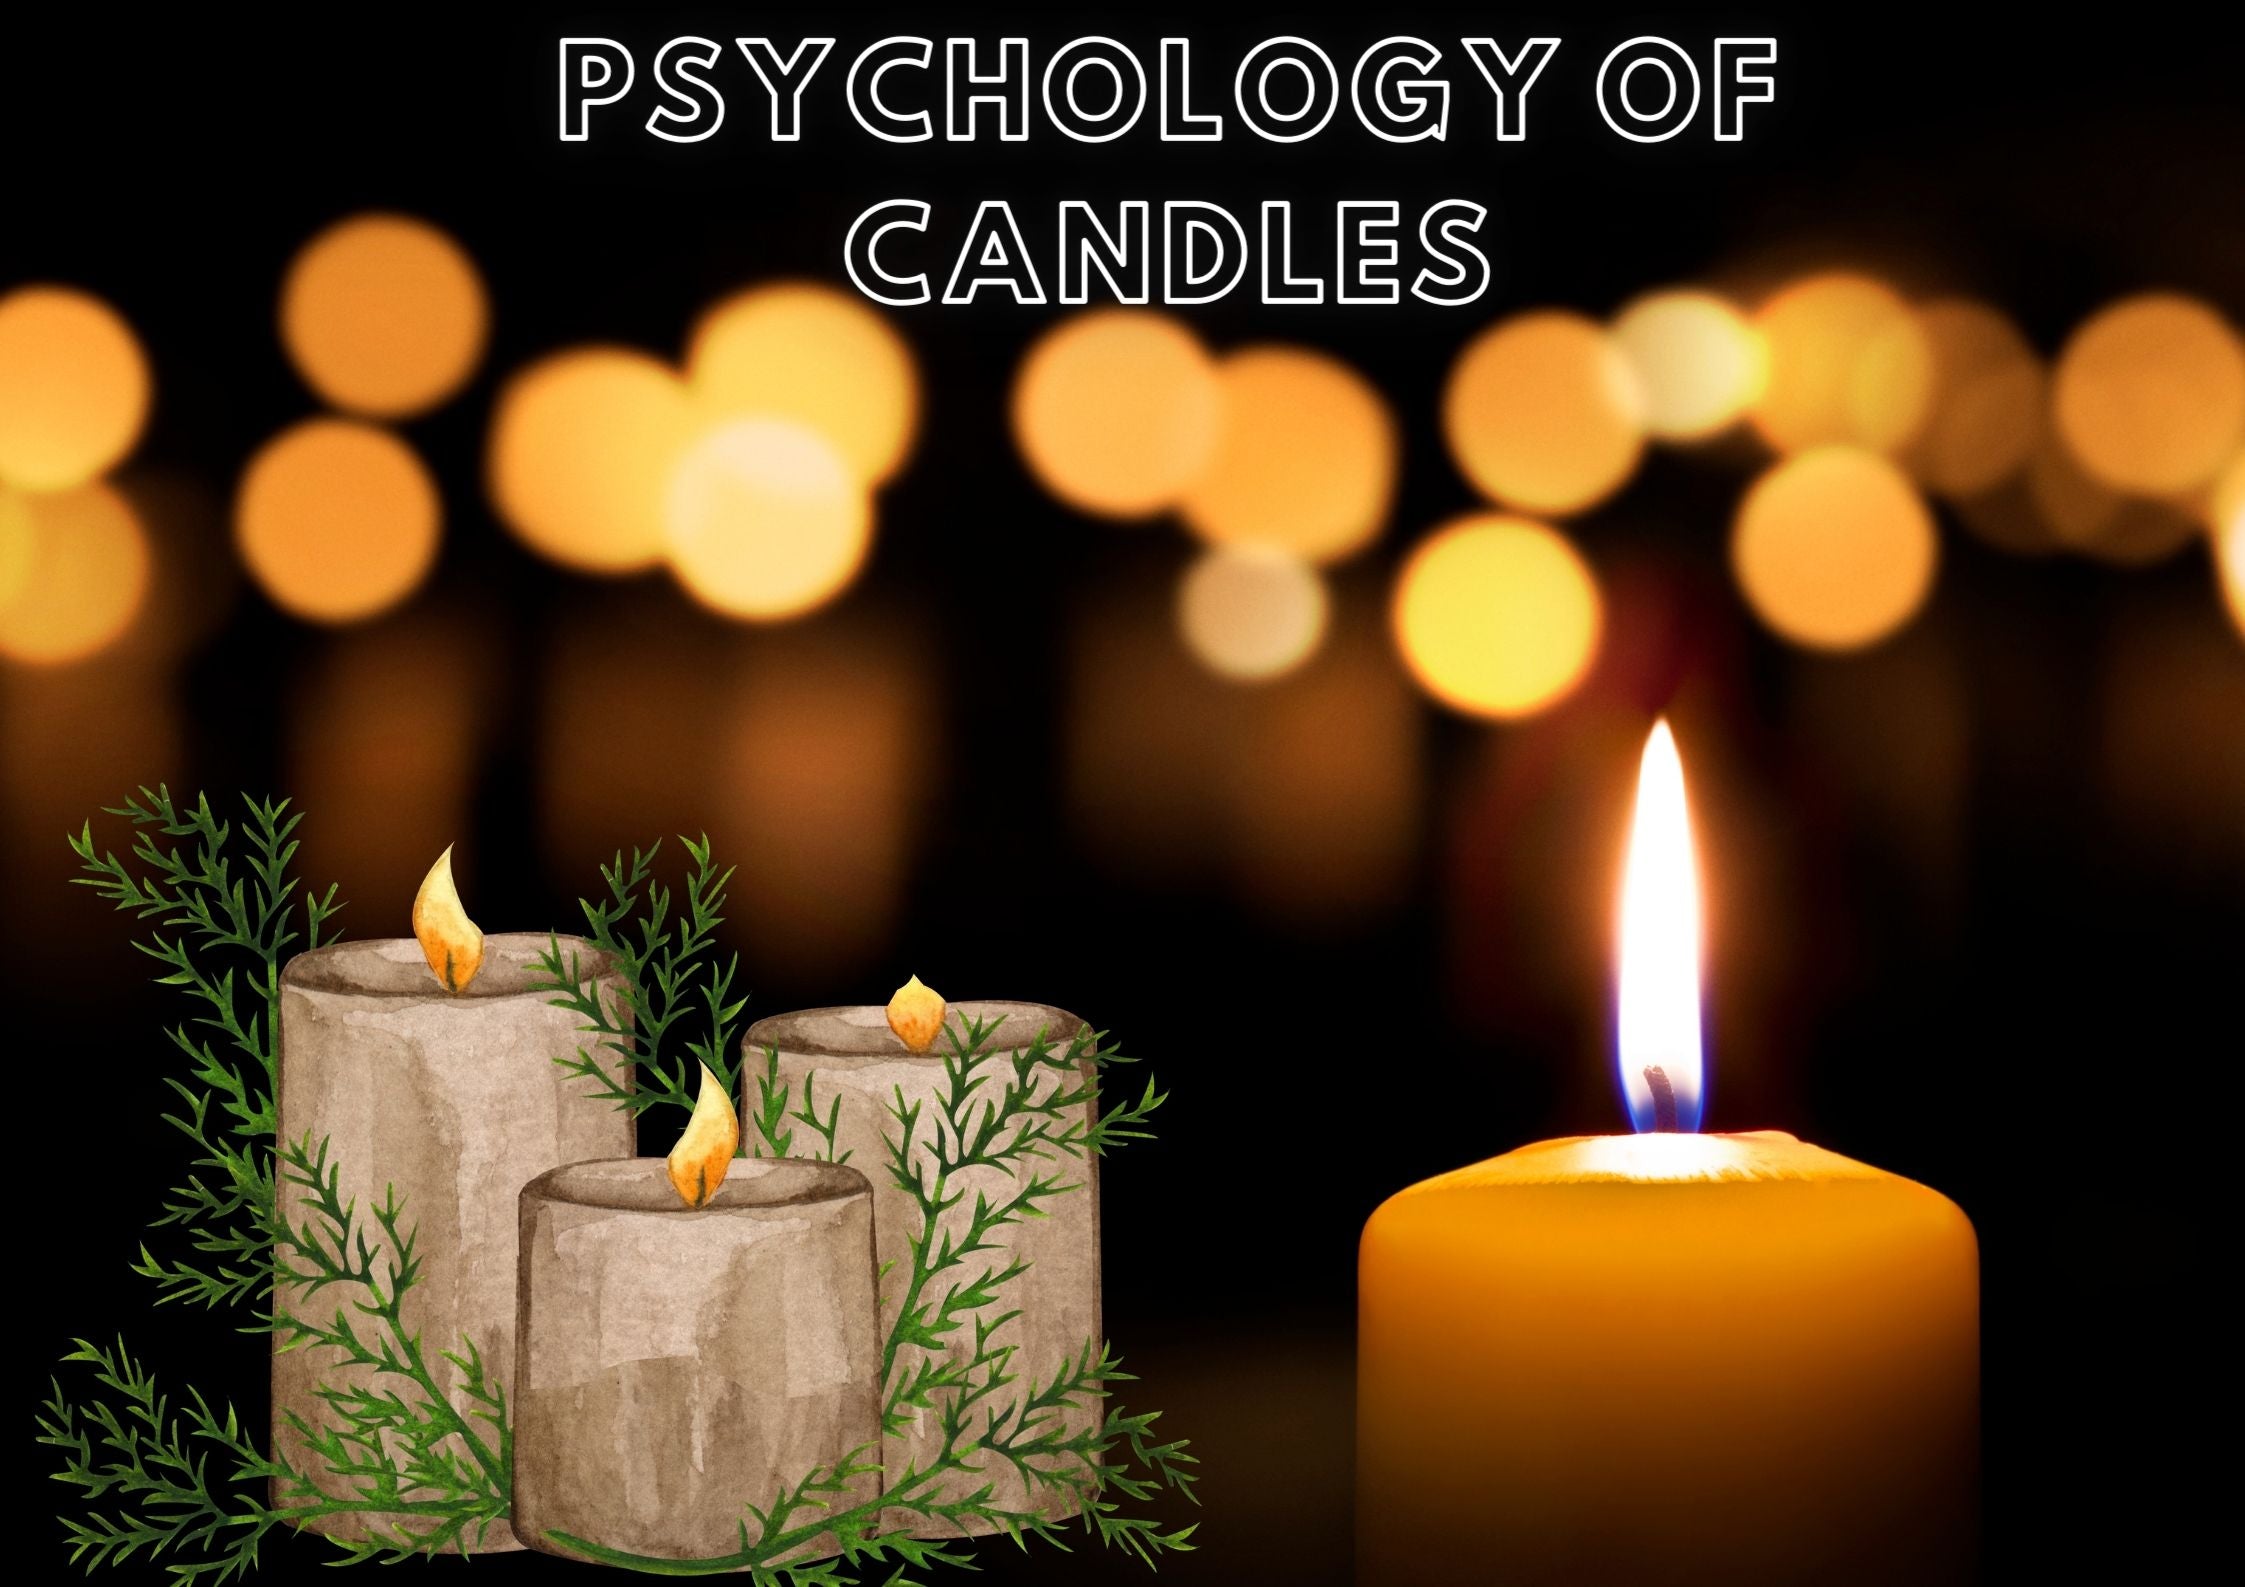 Psychology of candles